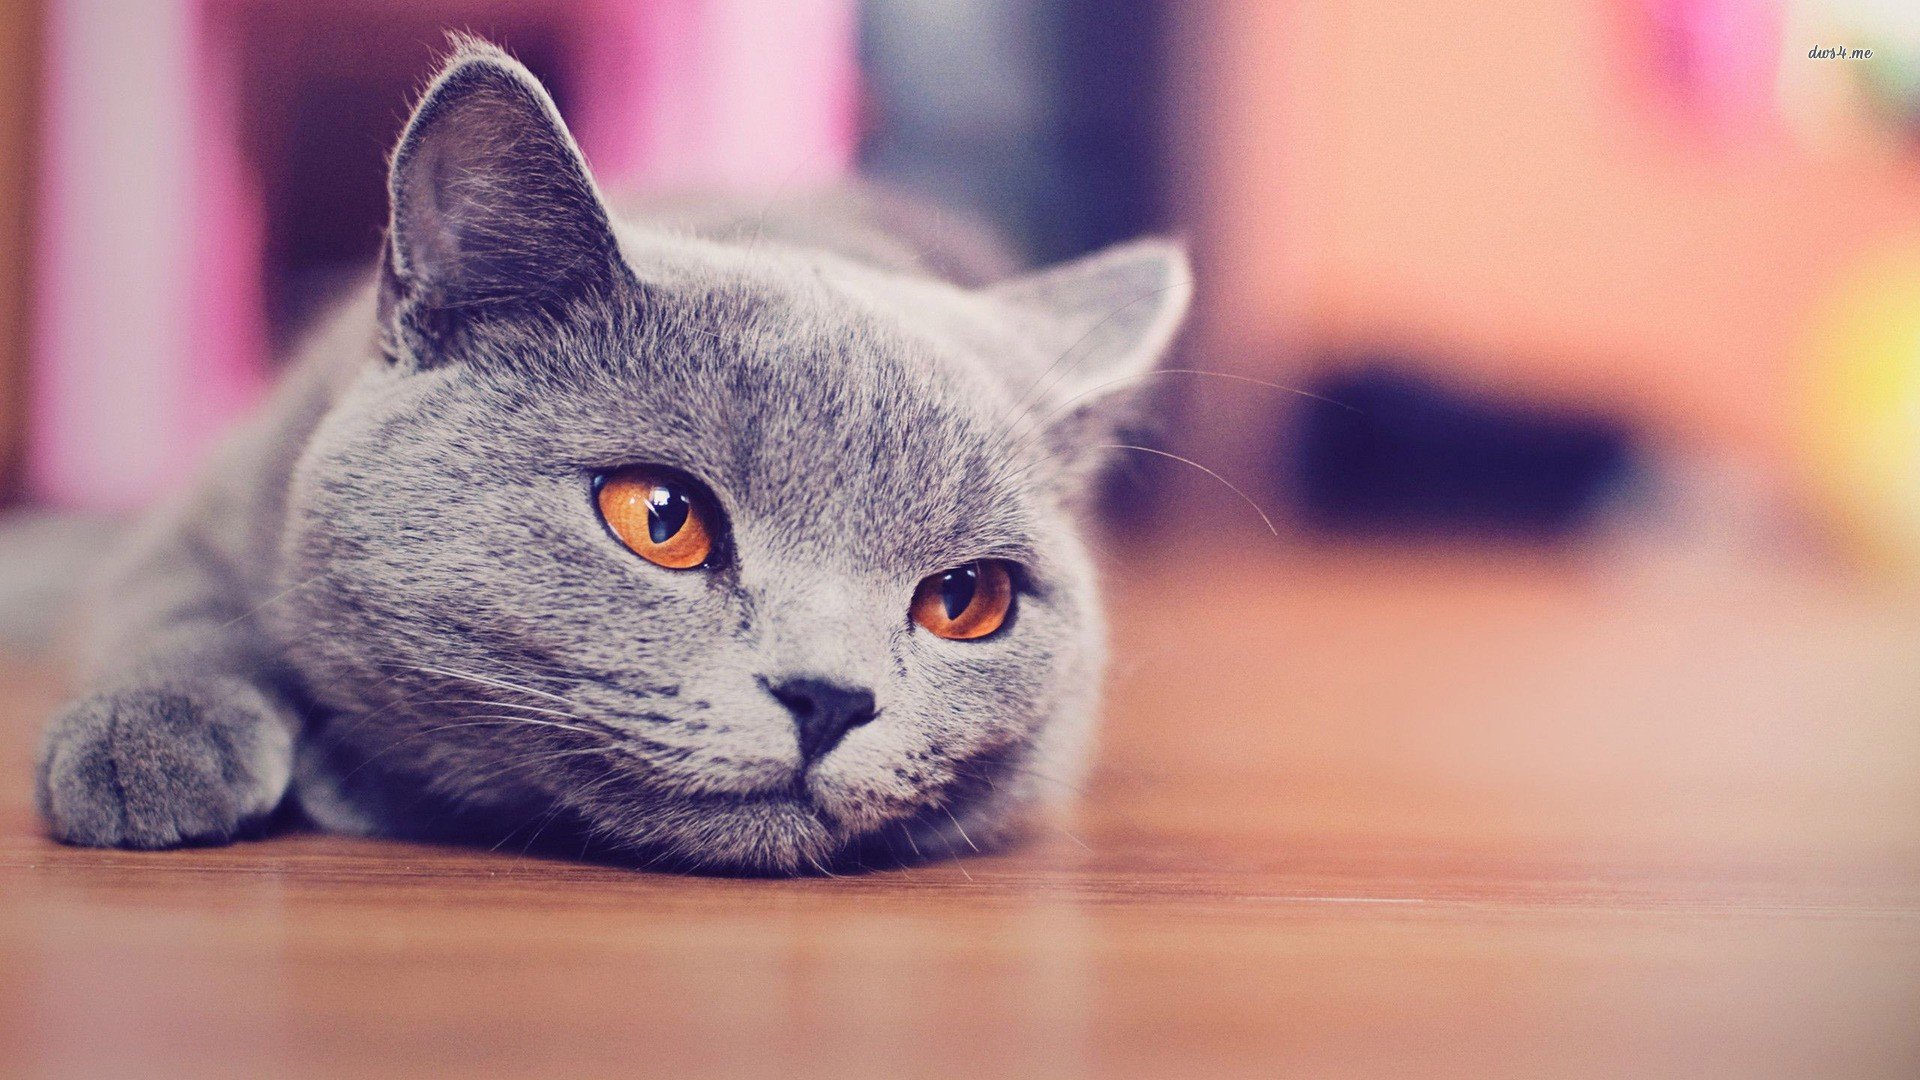 blue, British shorthair HD Wallpapers / Desktop and Mobile Images & Photos